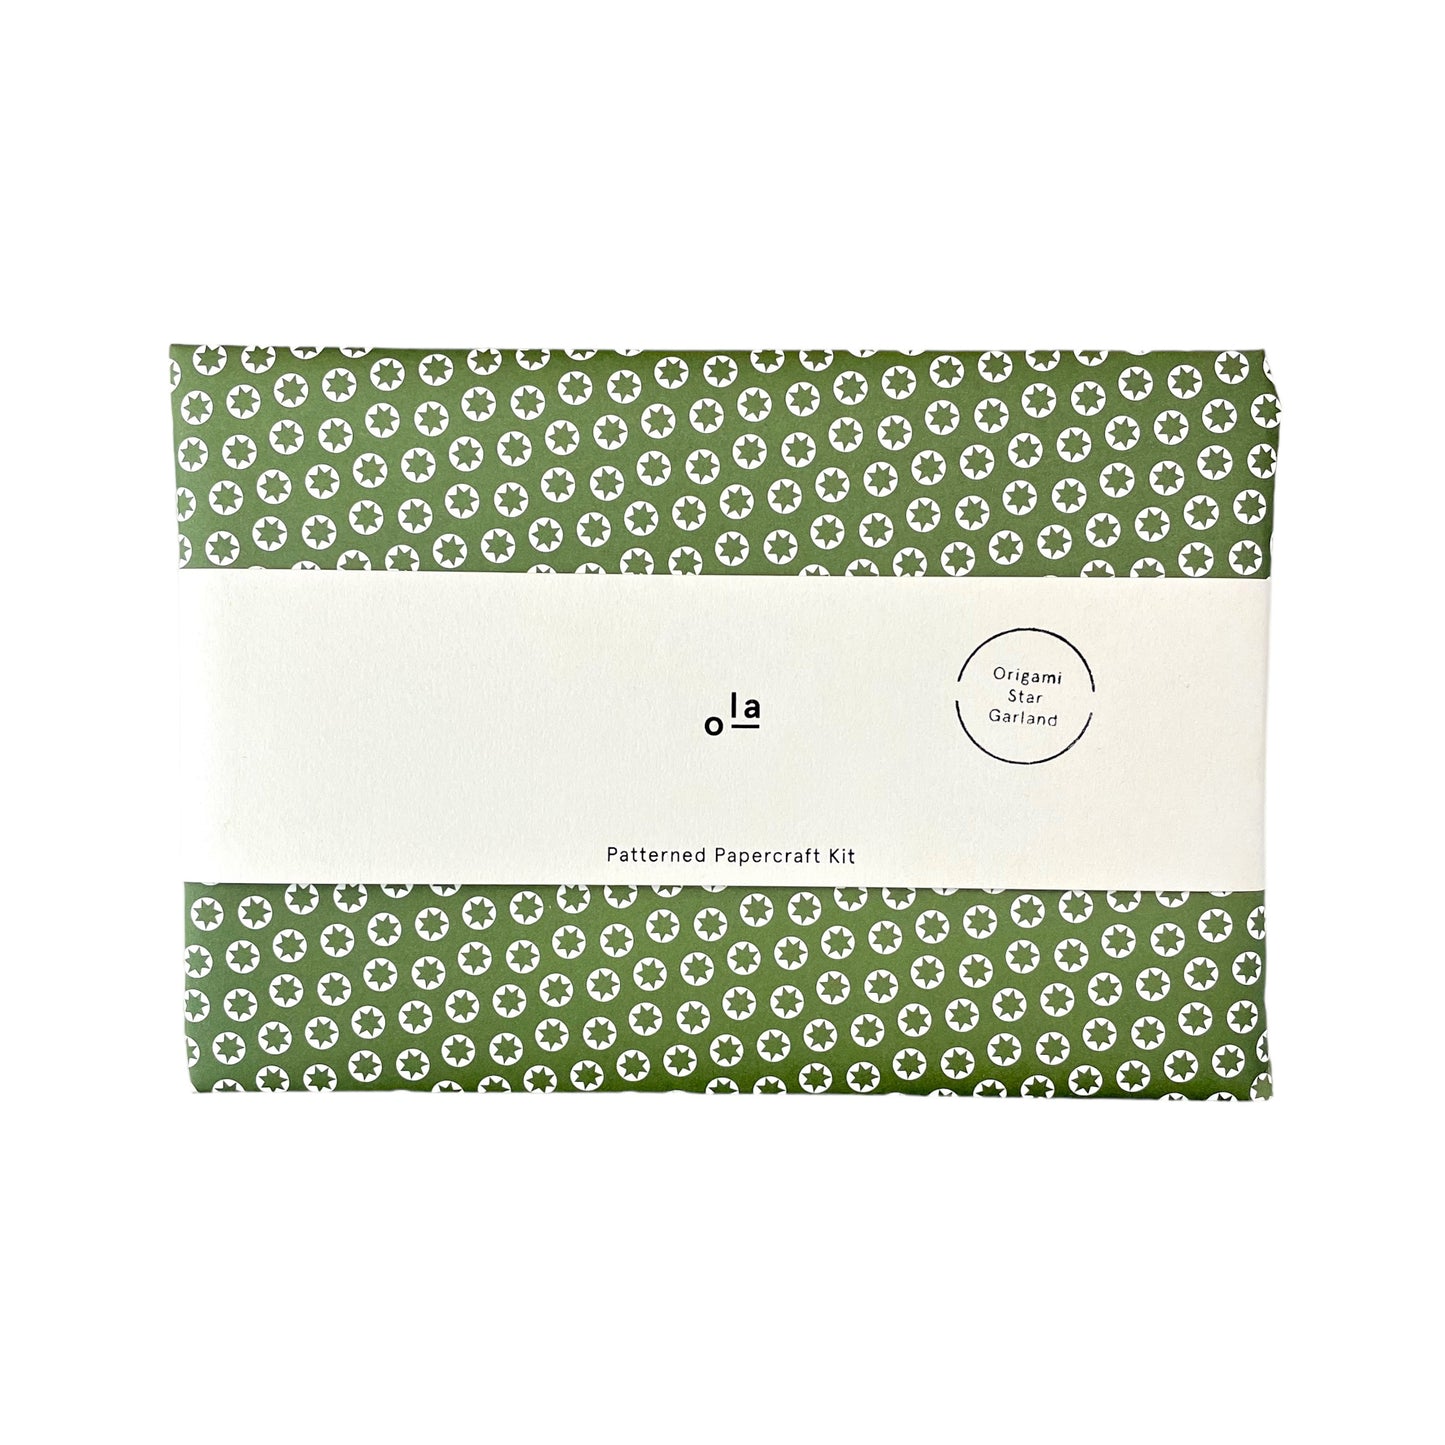 A garland of small paper stars, outer packaging envelope pictured with branded belly band